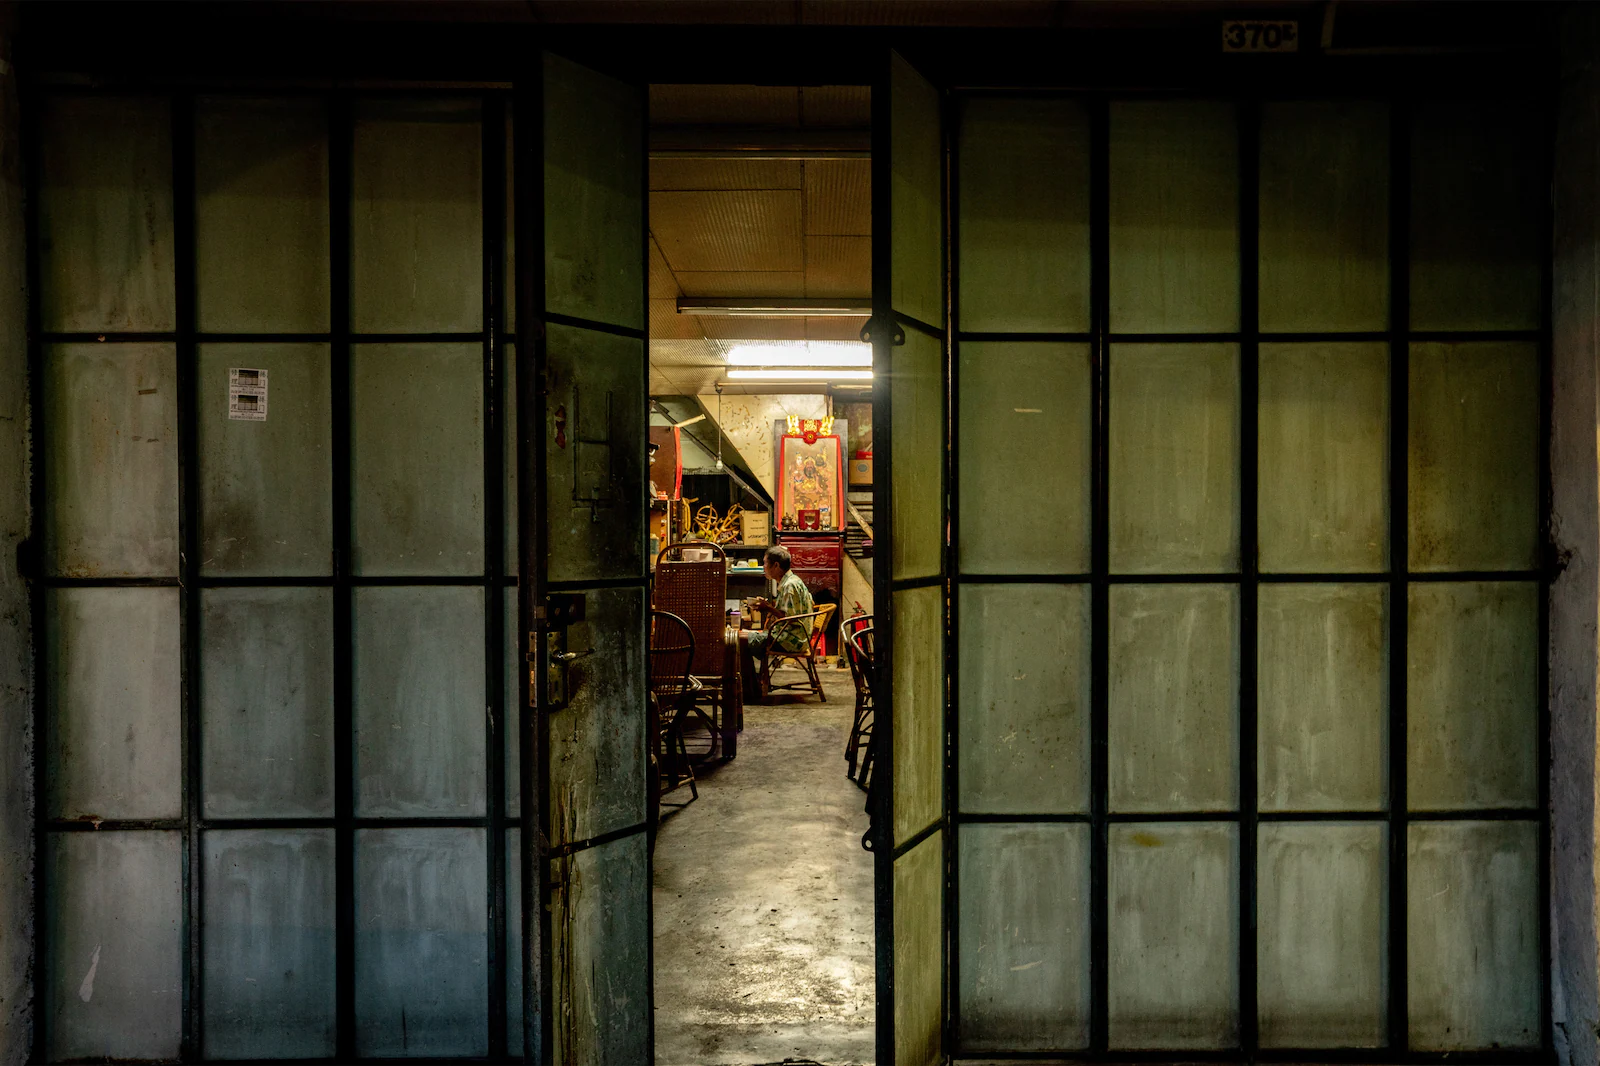 Doors partioning the interior of an old shophouse